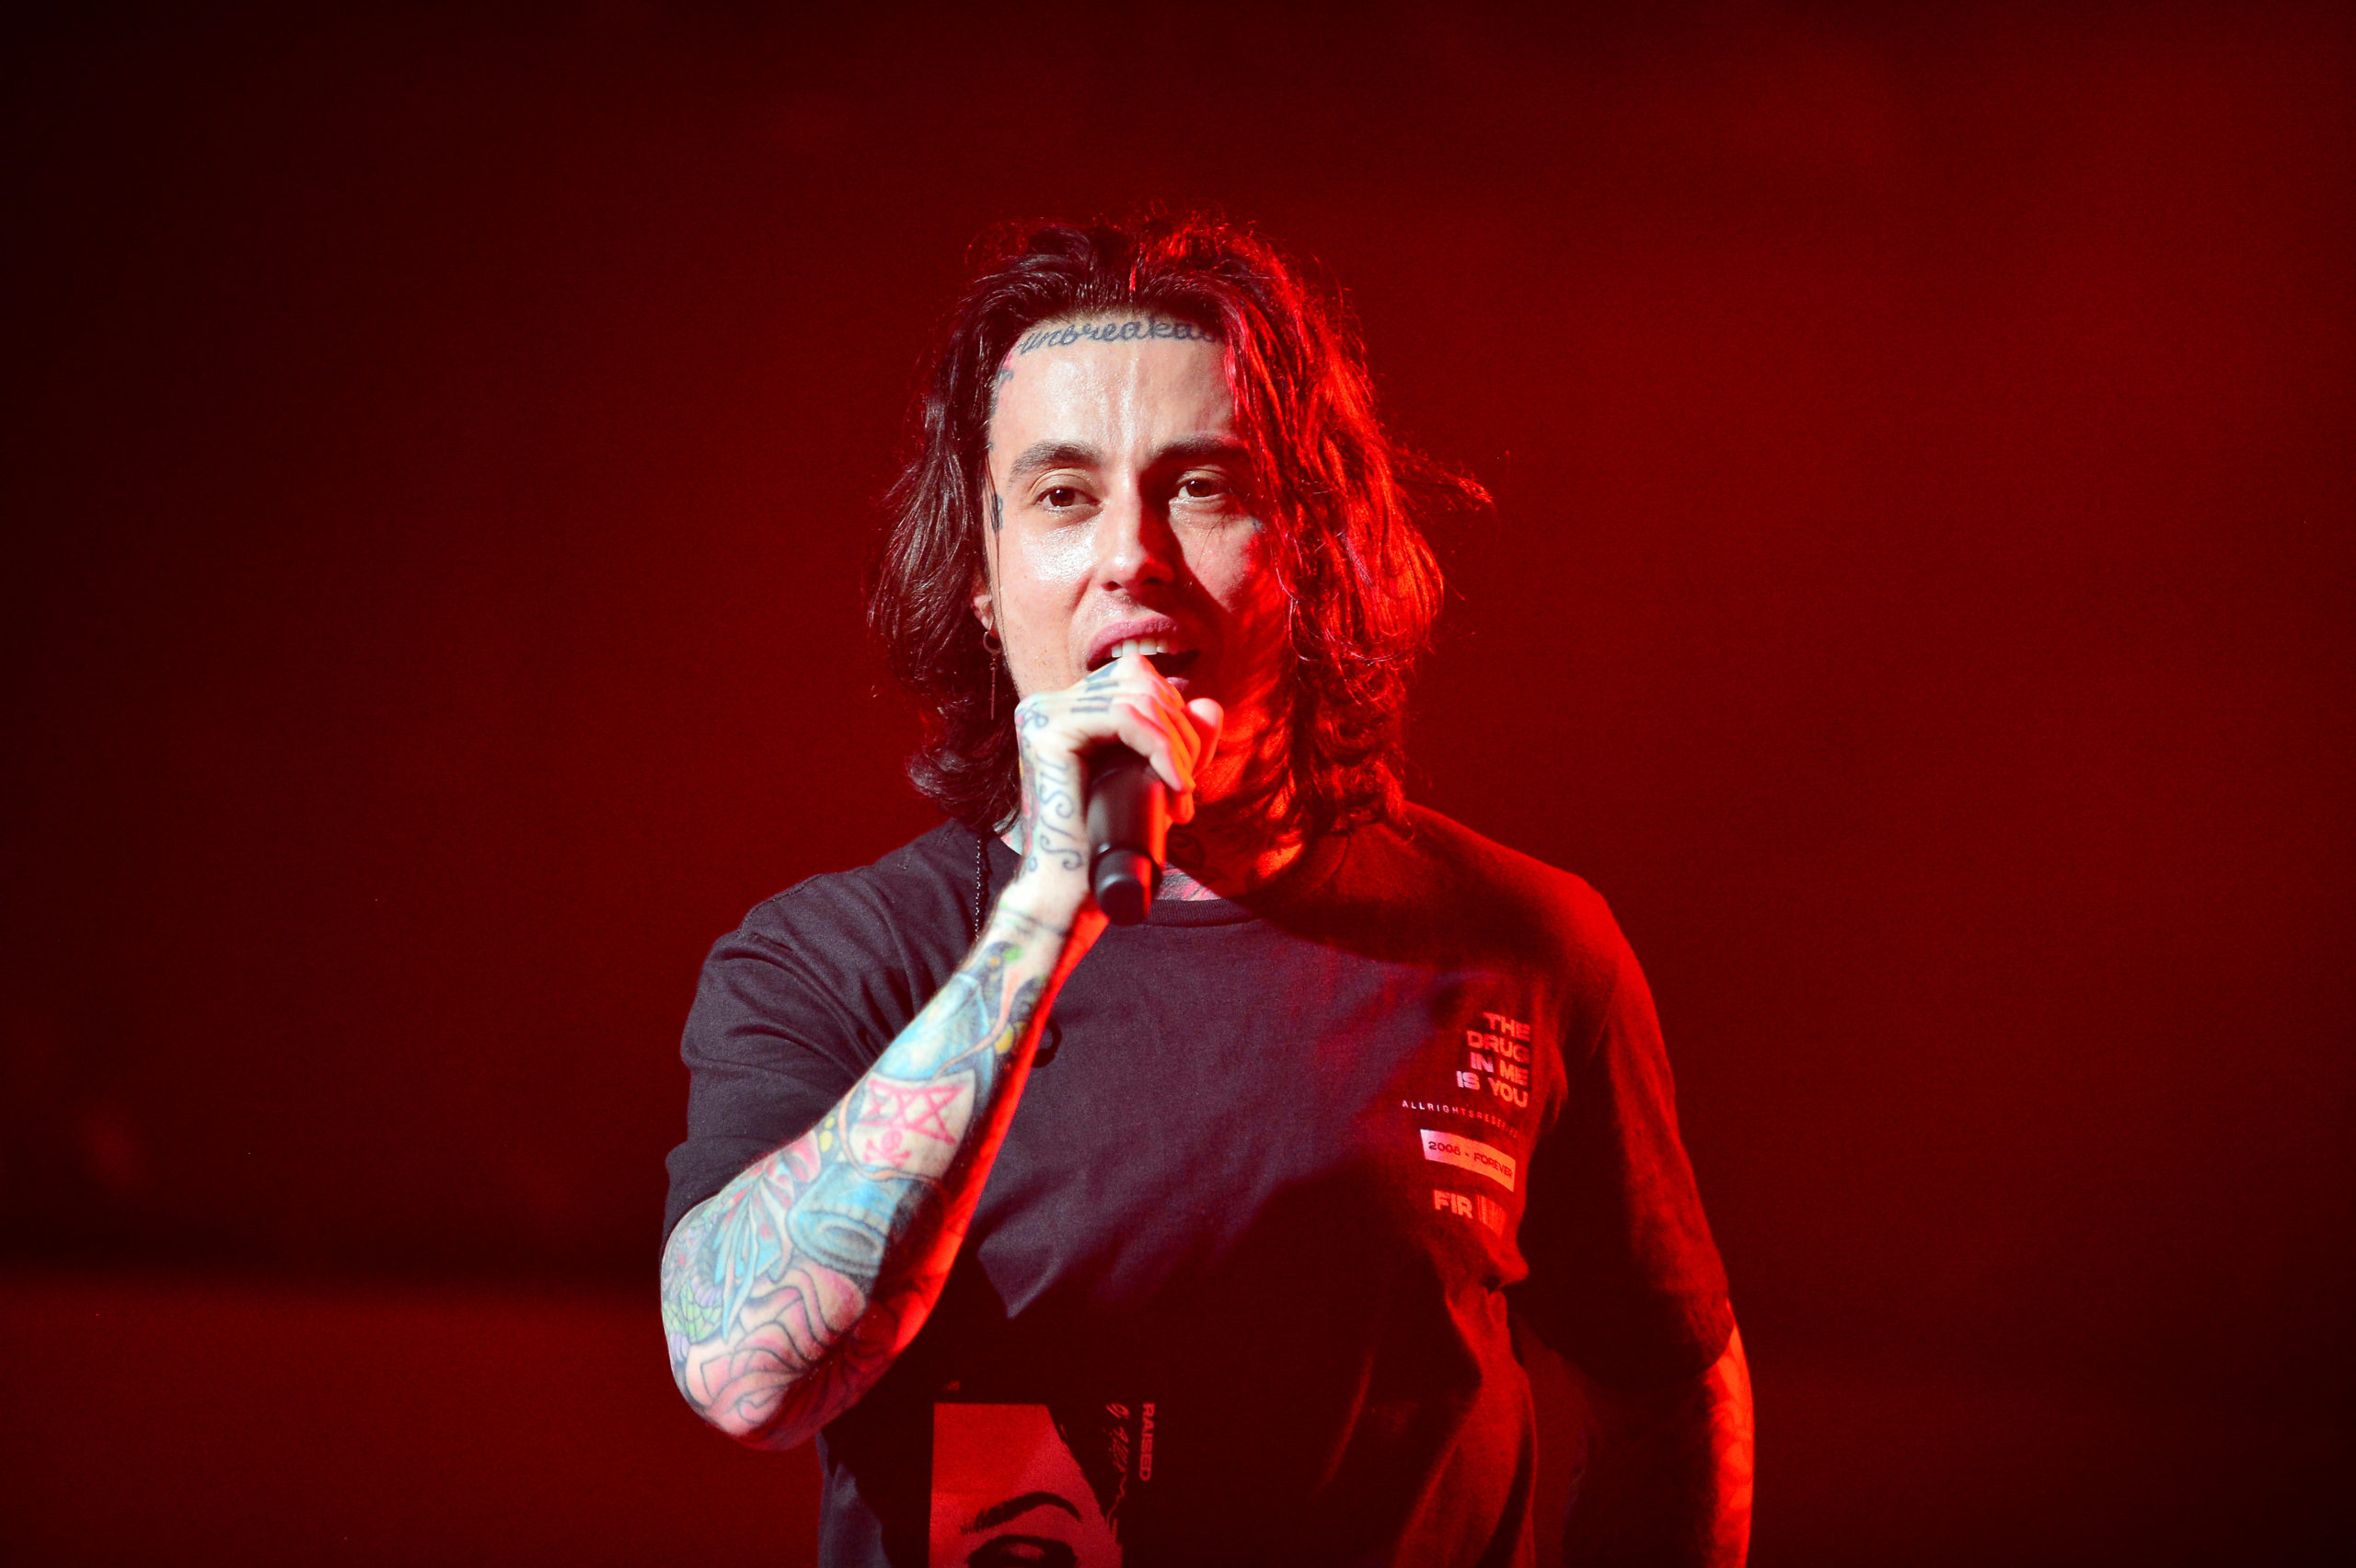 Ronnie Radke calls out Playboi Carti for using 'falling in reverse' on merch